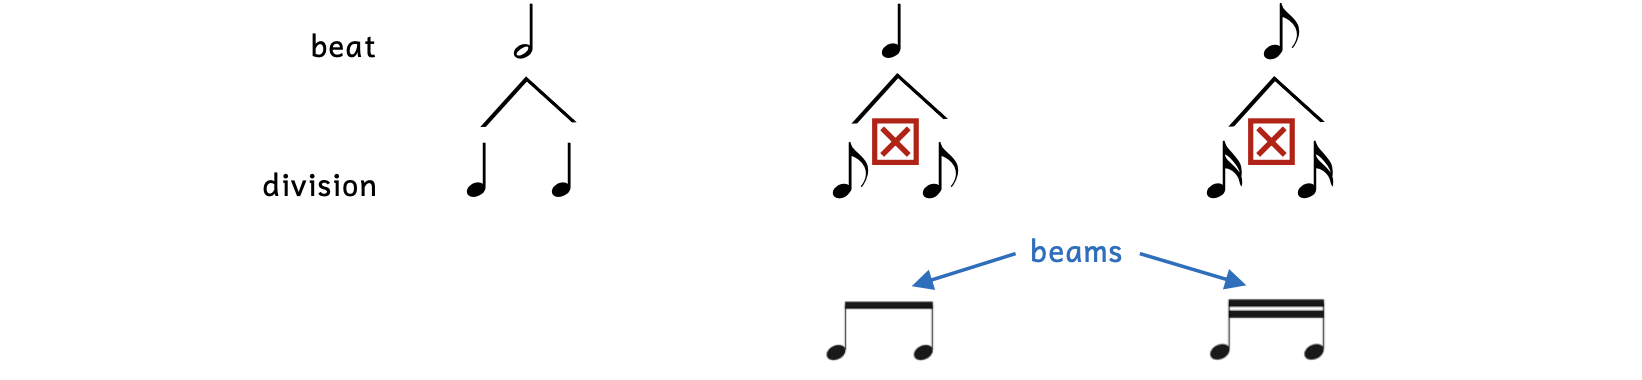 Illustration of how two flags become beamed. The quarter note beat divides into two eighth notes. Since the two eighth notes fall within a beat, they are beamed together with a single beam. The eighth note beat divides into two sixteenth notes. Since the two sixteenth notes fall within a beat, they are beamed together with two beams.